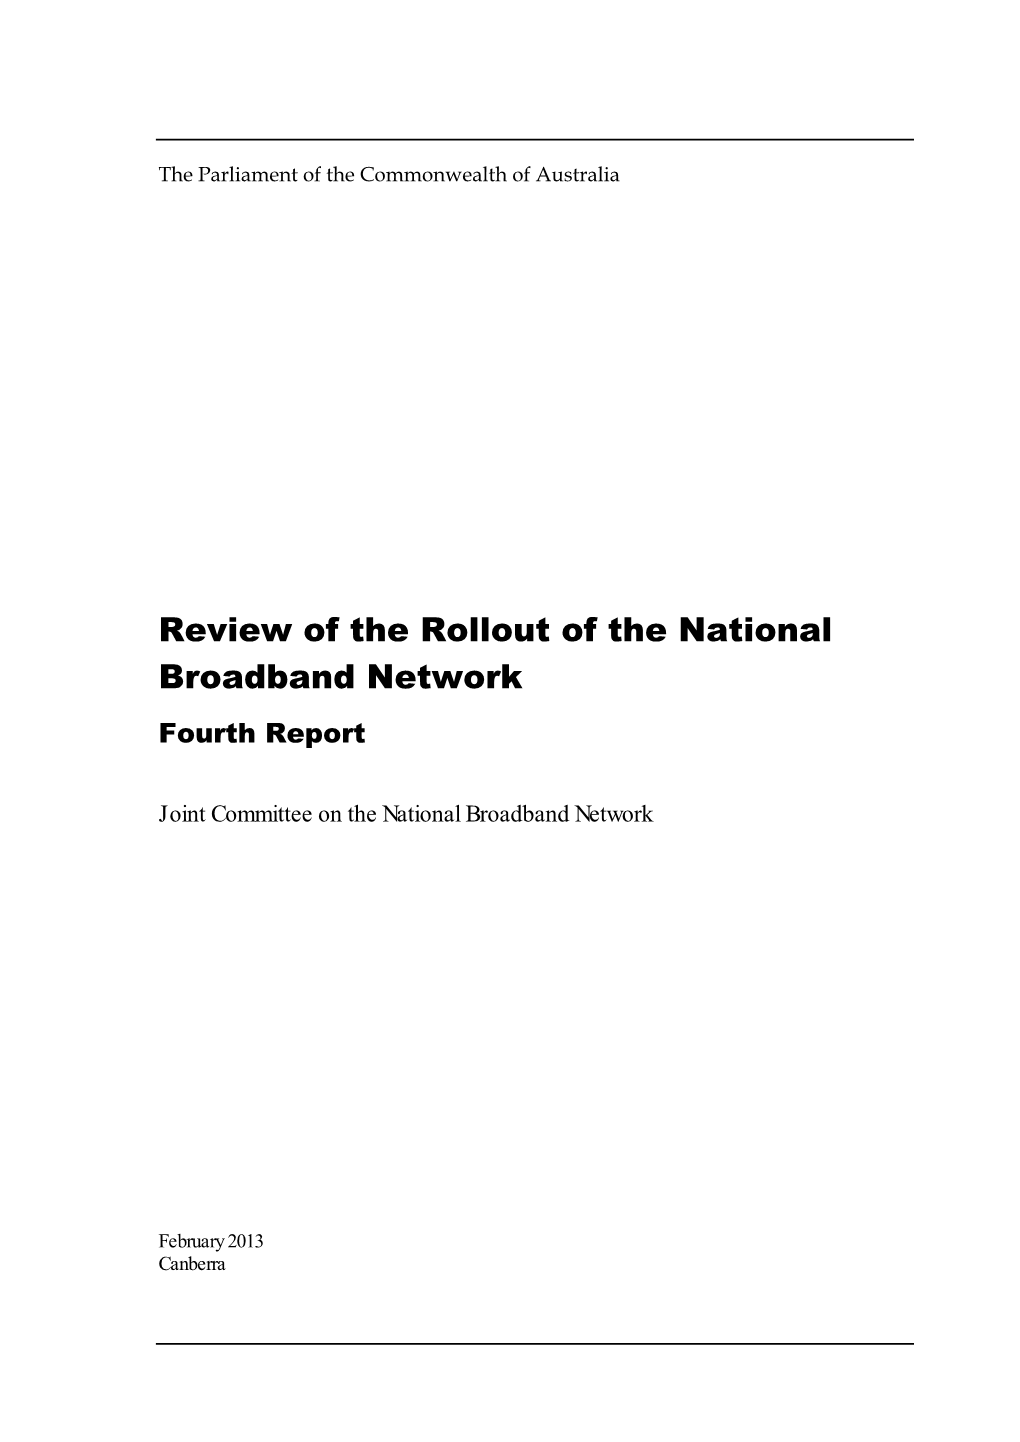 Review of the Rollout of the National Broadband Network Fourth Report